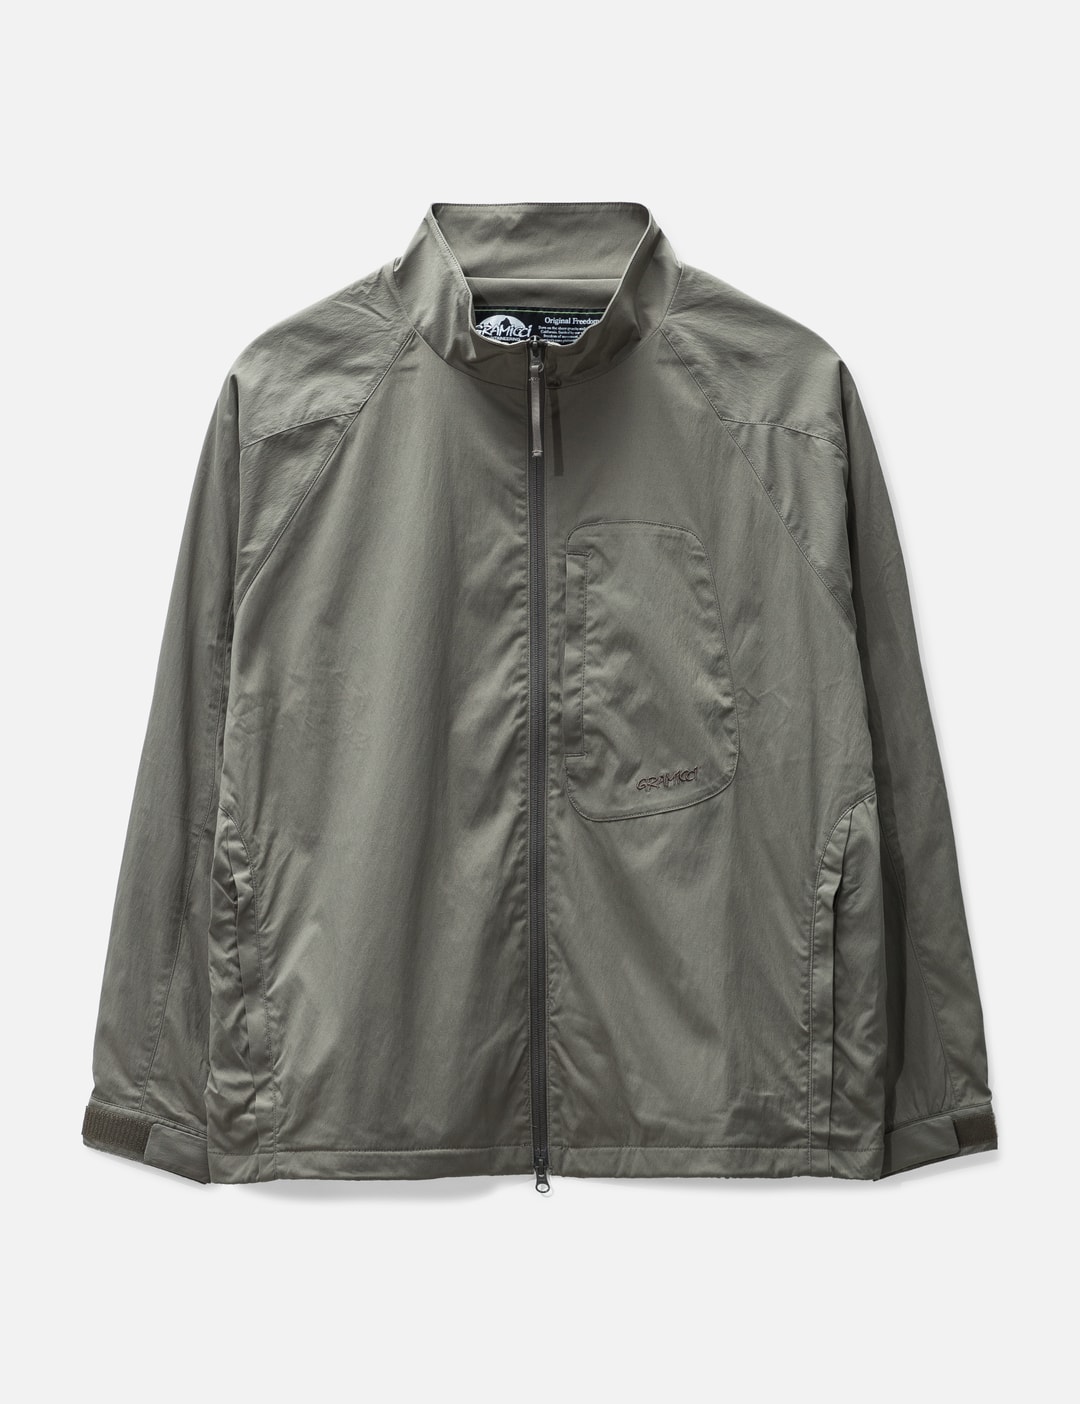 Gramicci - Softshell EQT Jacket | HBX - Globally Curated Fashion and ...